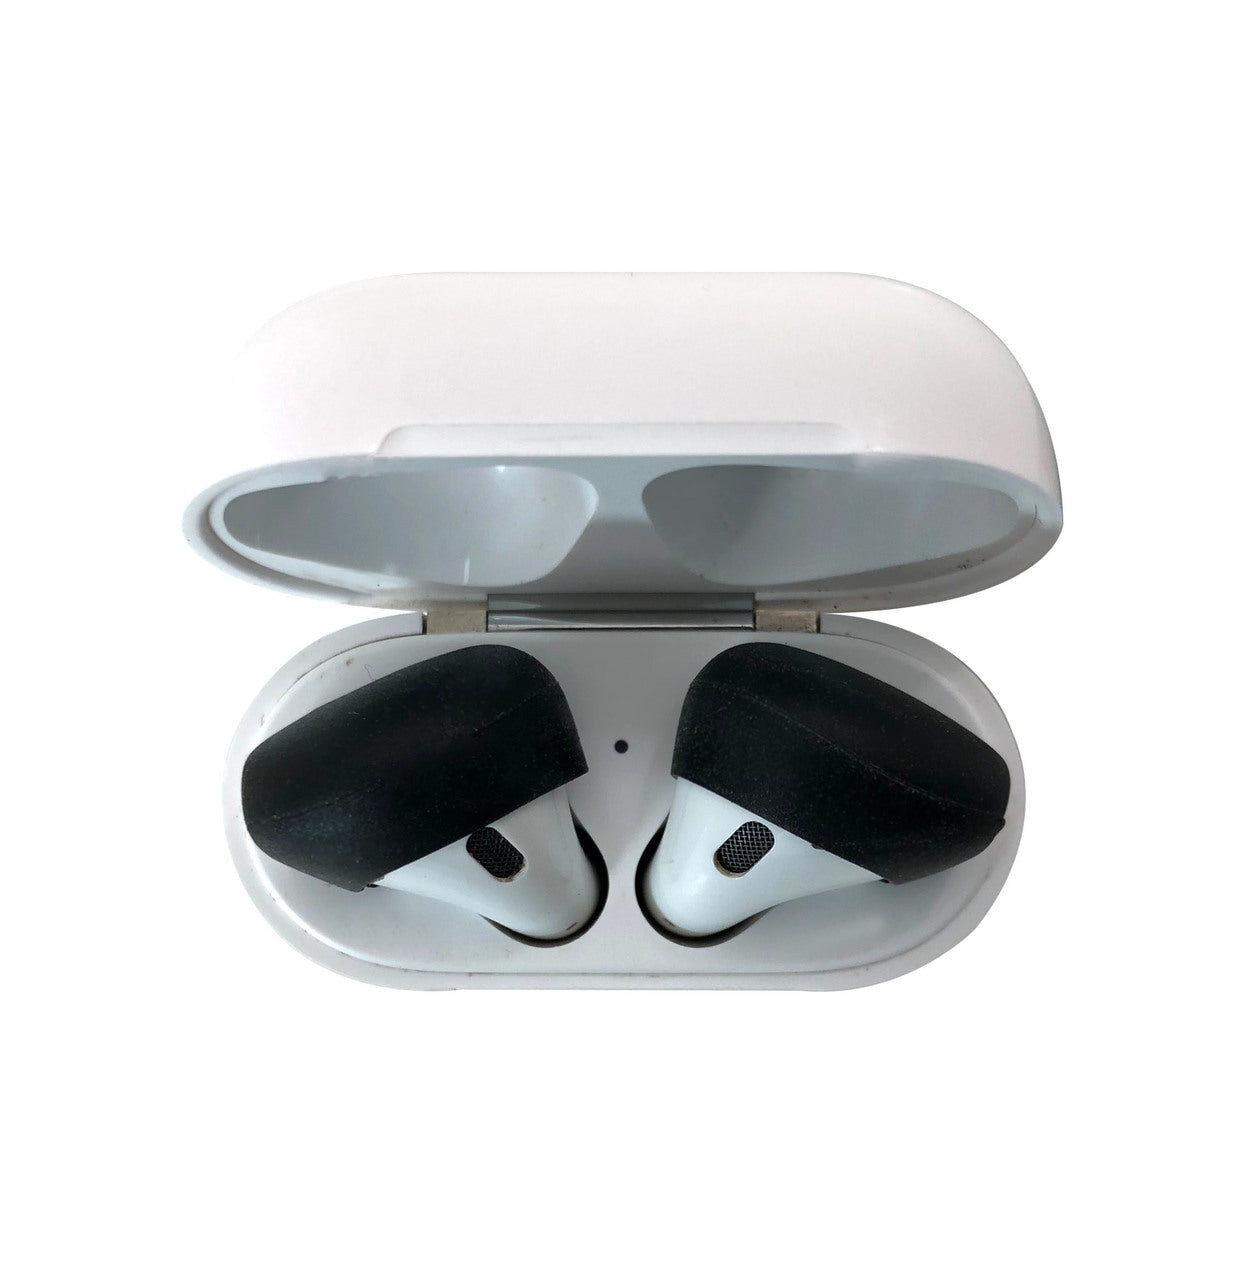 AirPods & Apple Earbuds Skins | SPACE (BLACK) 

* AERZ is a simple comfortable AirPod and Apple Earbud 2.0 solution that improves the sound quality and comfort of your Apple AirPods and Apple Earbud 2.0
    * Soft high quality silicone cover skins improve the comfort of Apple AirPods and Apple Earbuds 2.0 allowing you to wear your AirPods or Earbuds for hours on end without discomfort
    * AERZ dramatically improves the audio quality of Apple AirPods and Apple Earbuds 2.0 by air sealing AirPods and Earbuds